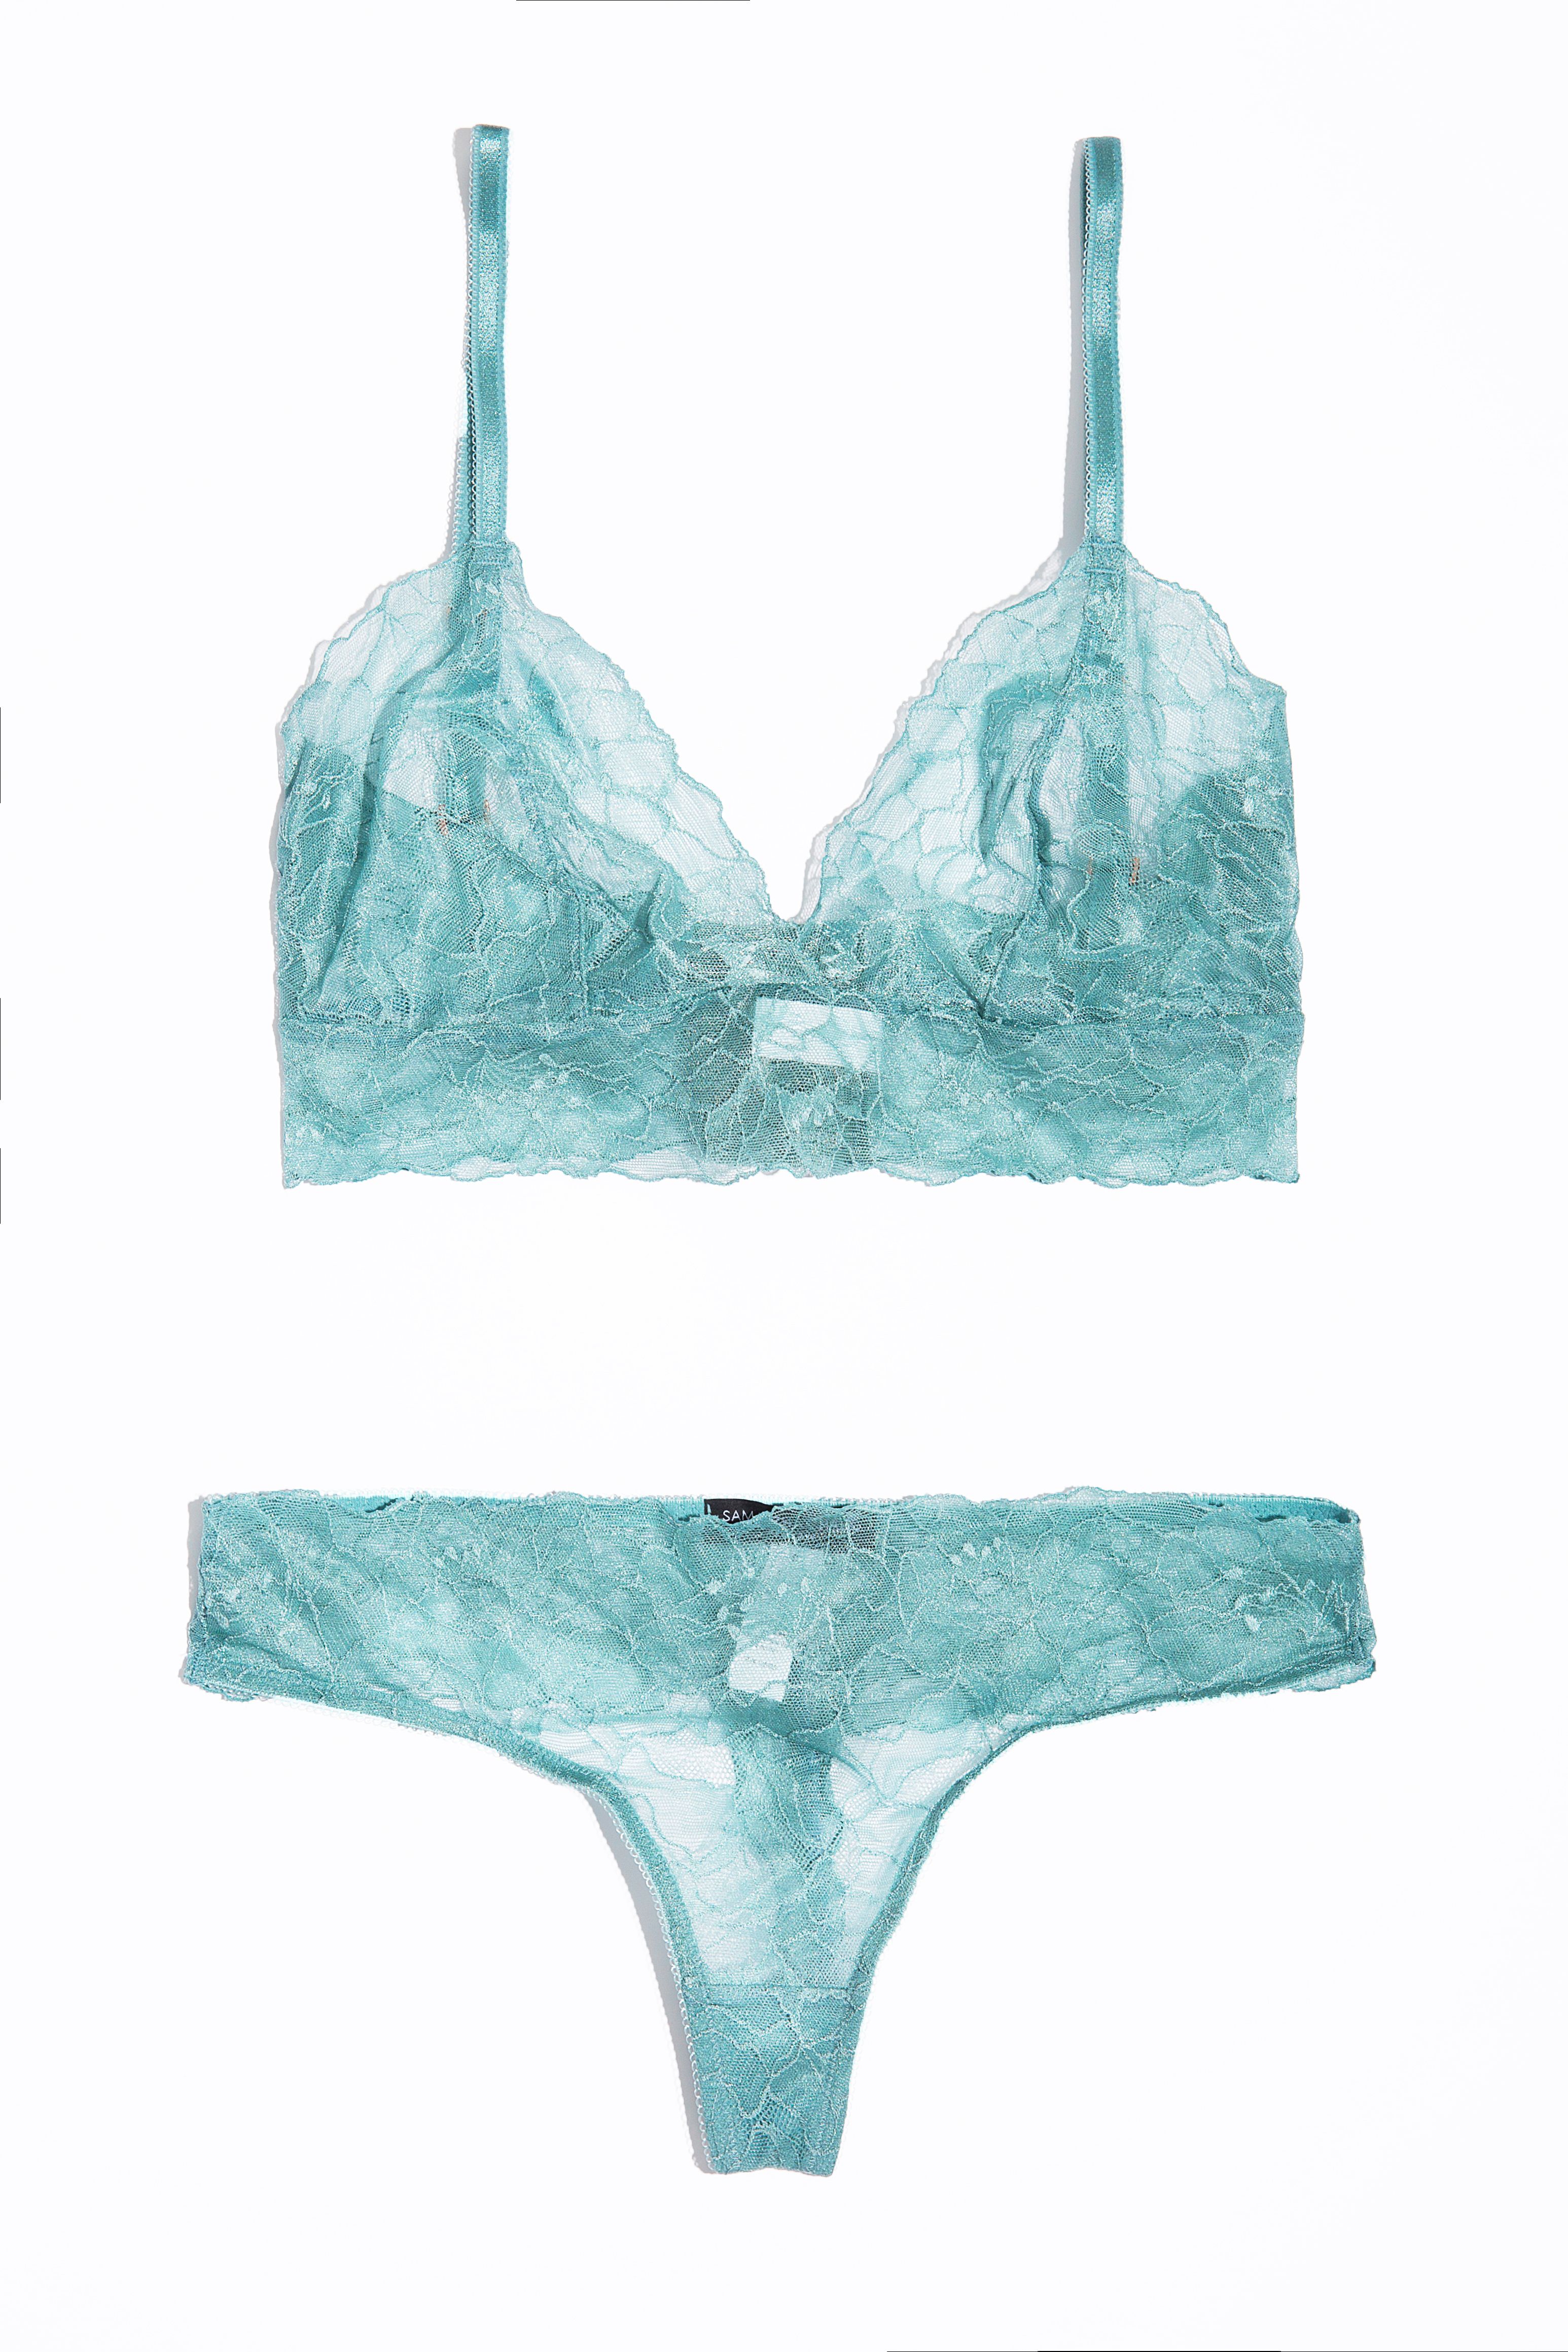 When Do You Actually Wear Your Fancy Lingerie?